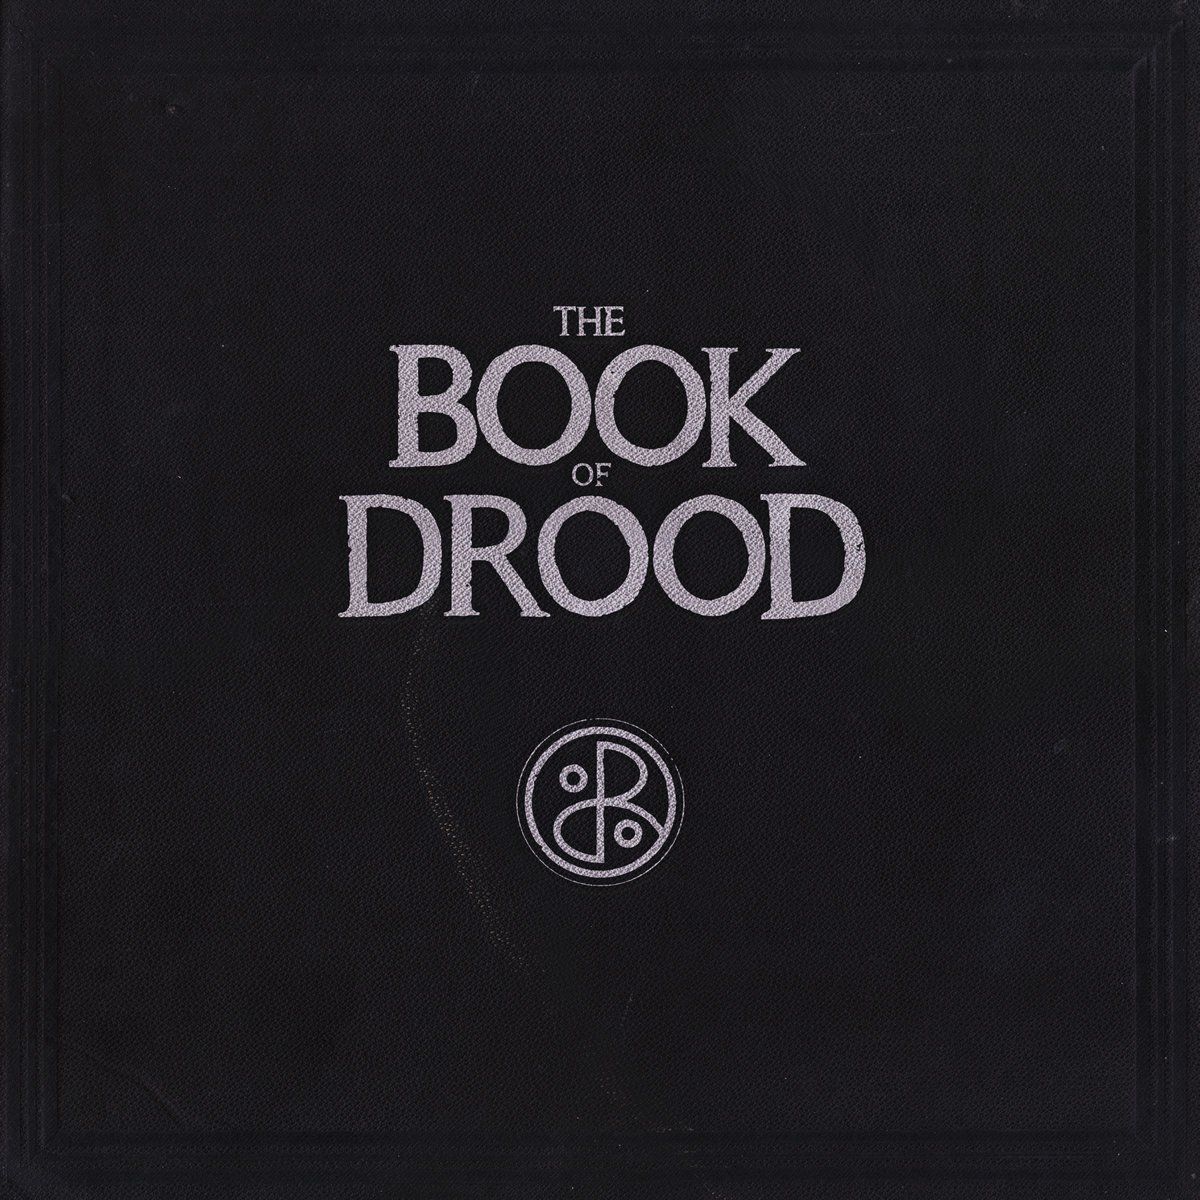 Listen to the Psychedelic Industrial, Post-Punk, and Experimental Rock of The Drood’s “The Book of Drood”